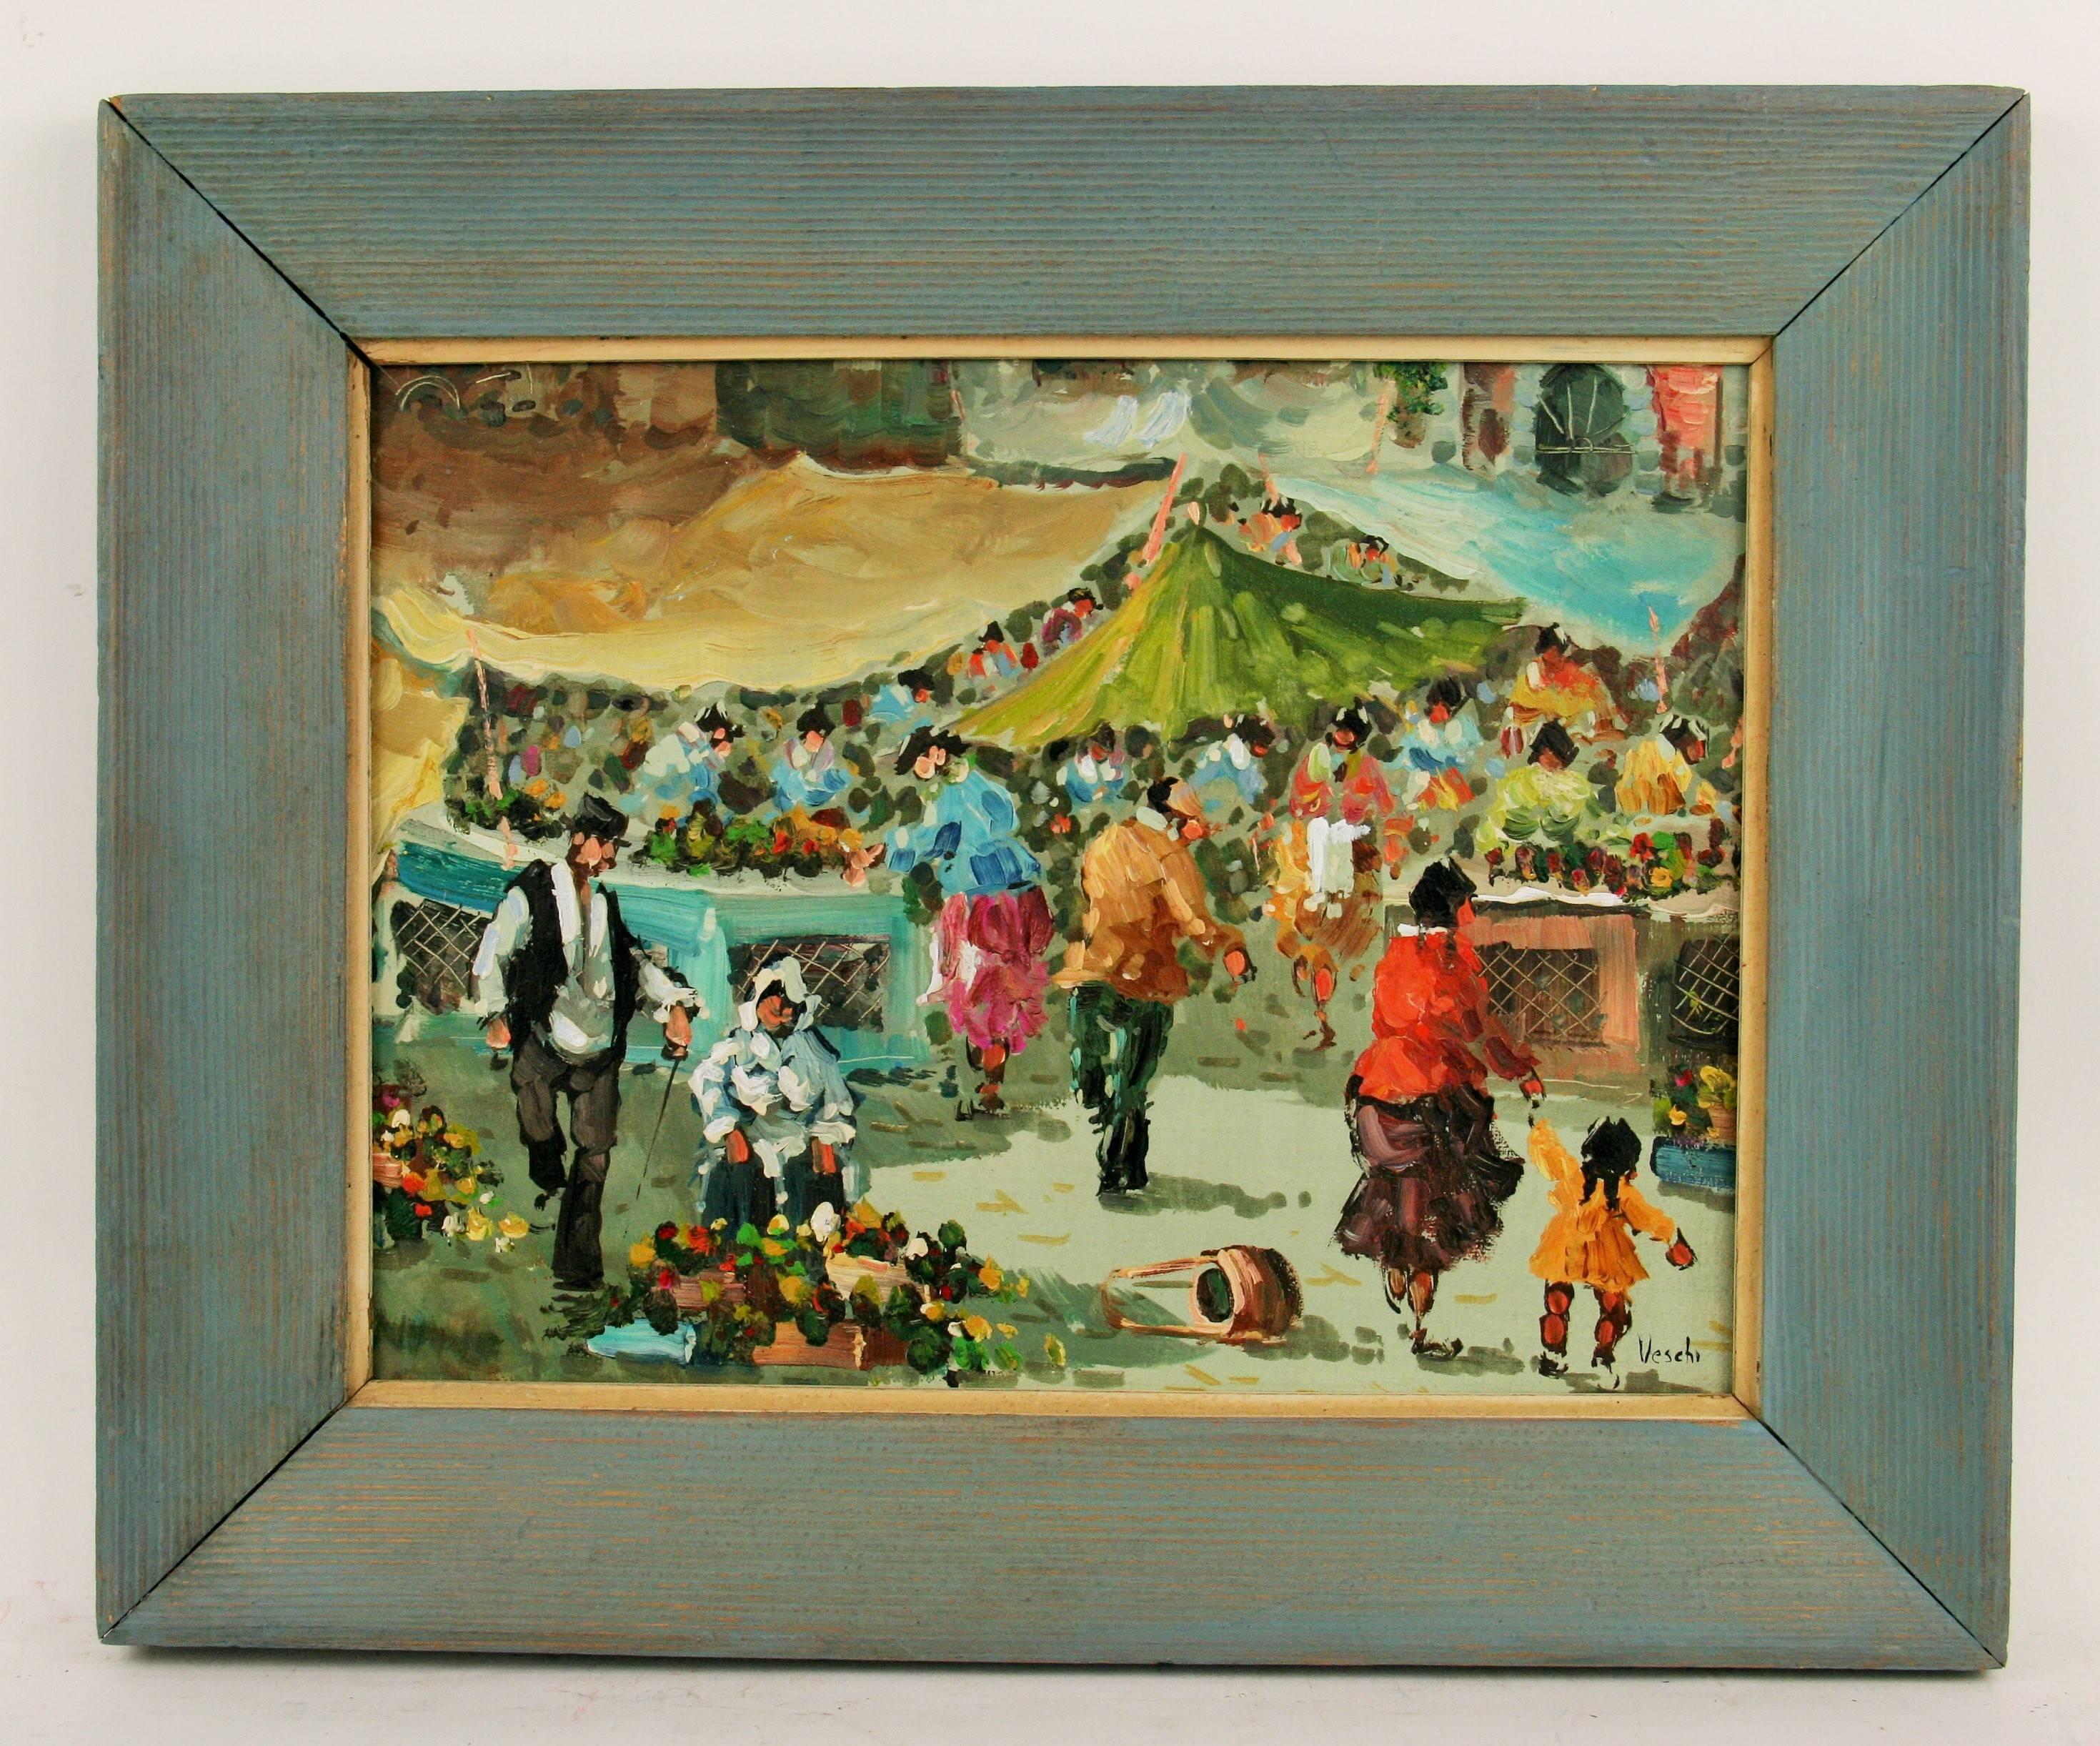 5-2519a Oil on artist board displayed in a painted wood frame 
Image size 10x12.5